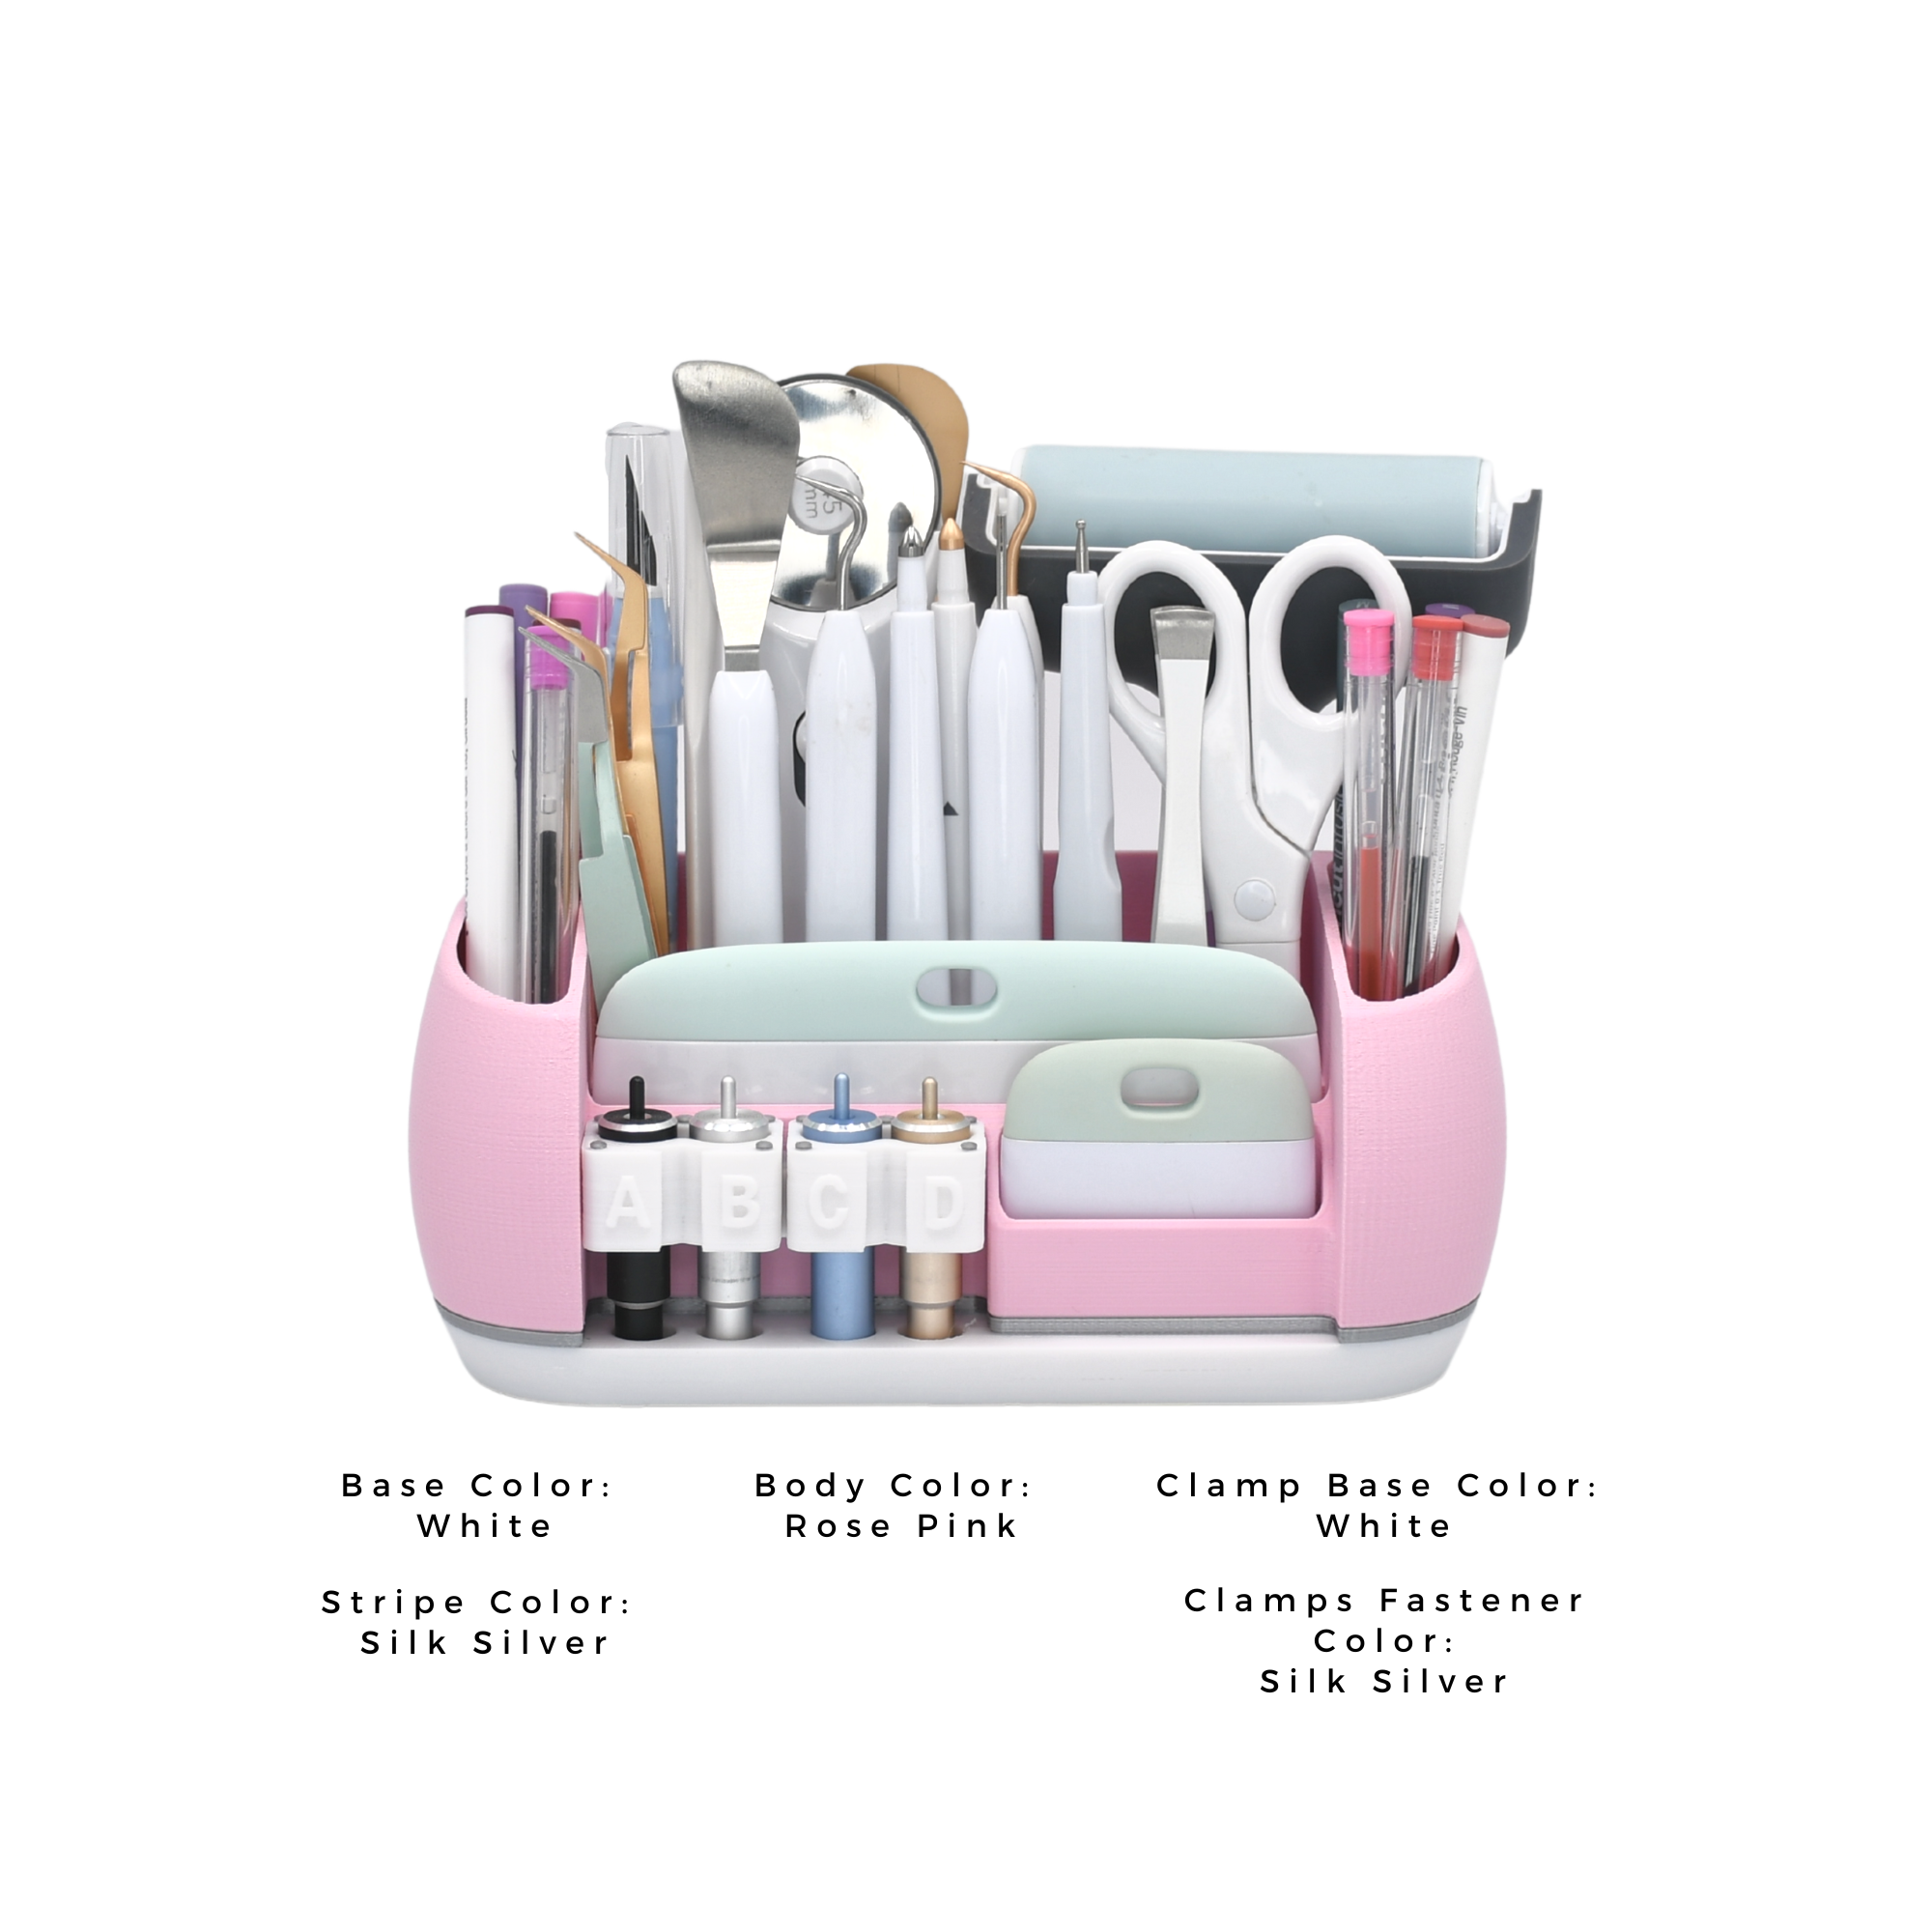 Organizer for Cricut Tools and Accessories Blade Holder Caddy,Tool Holder and Blade Caddy for Cricut Tools Organizer (Pink)